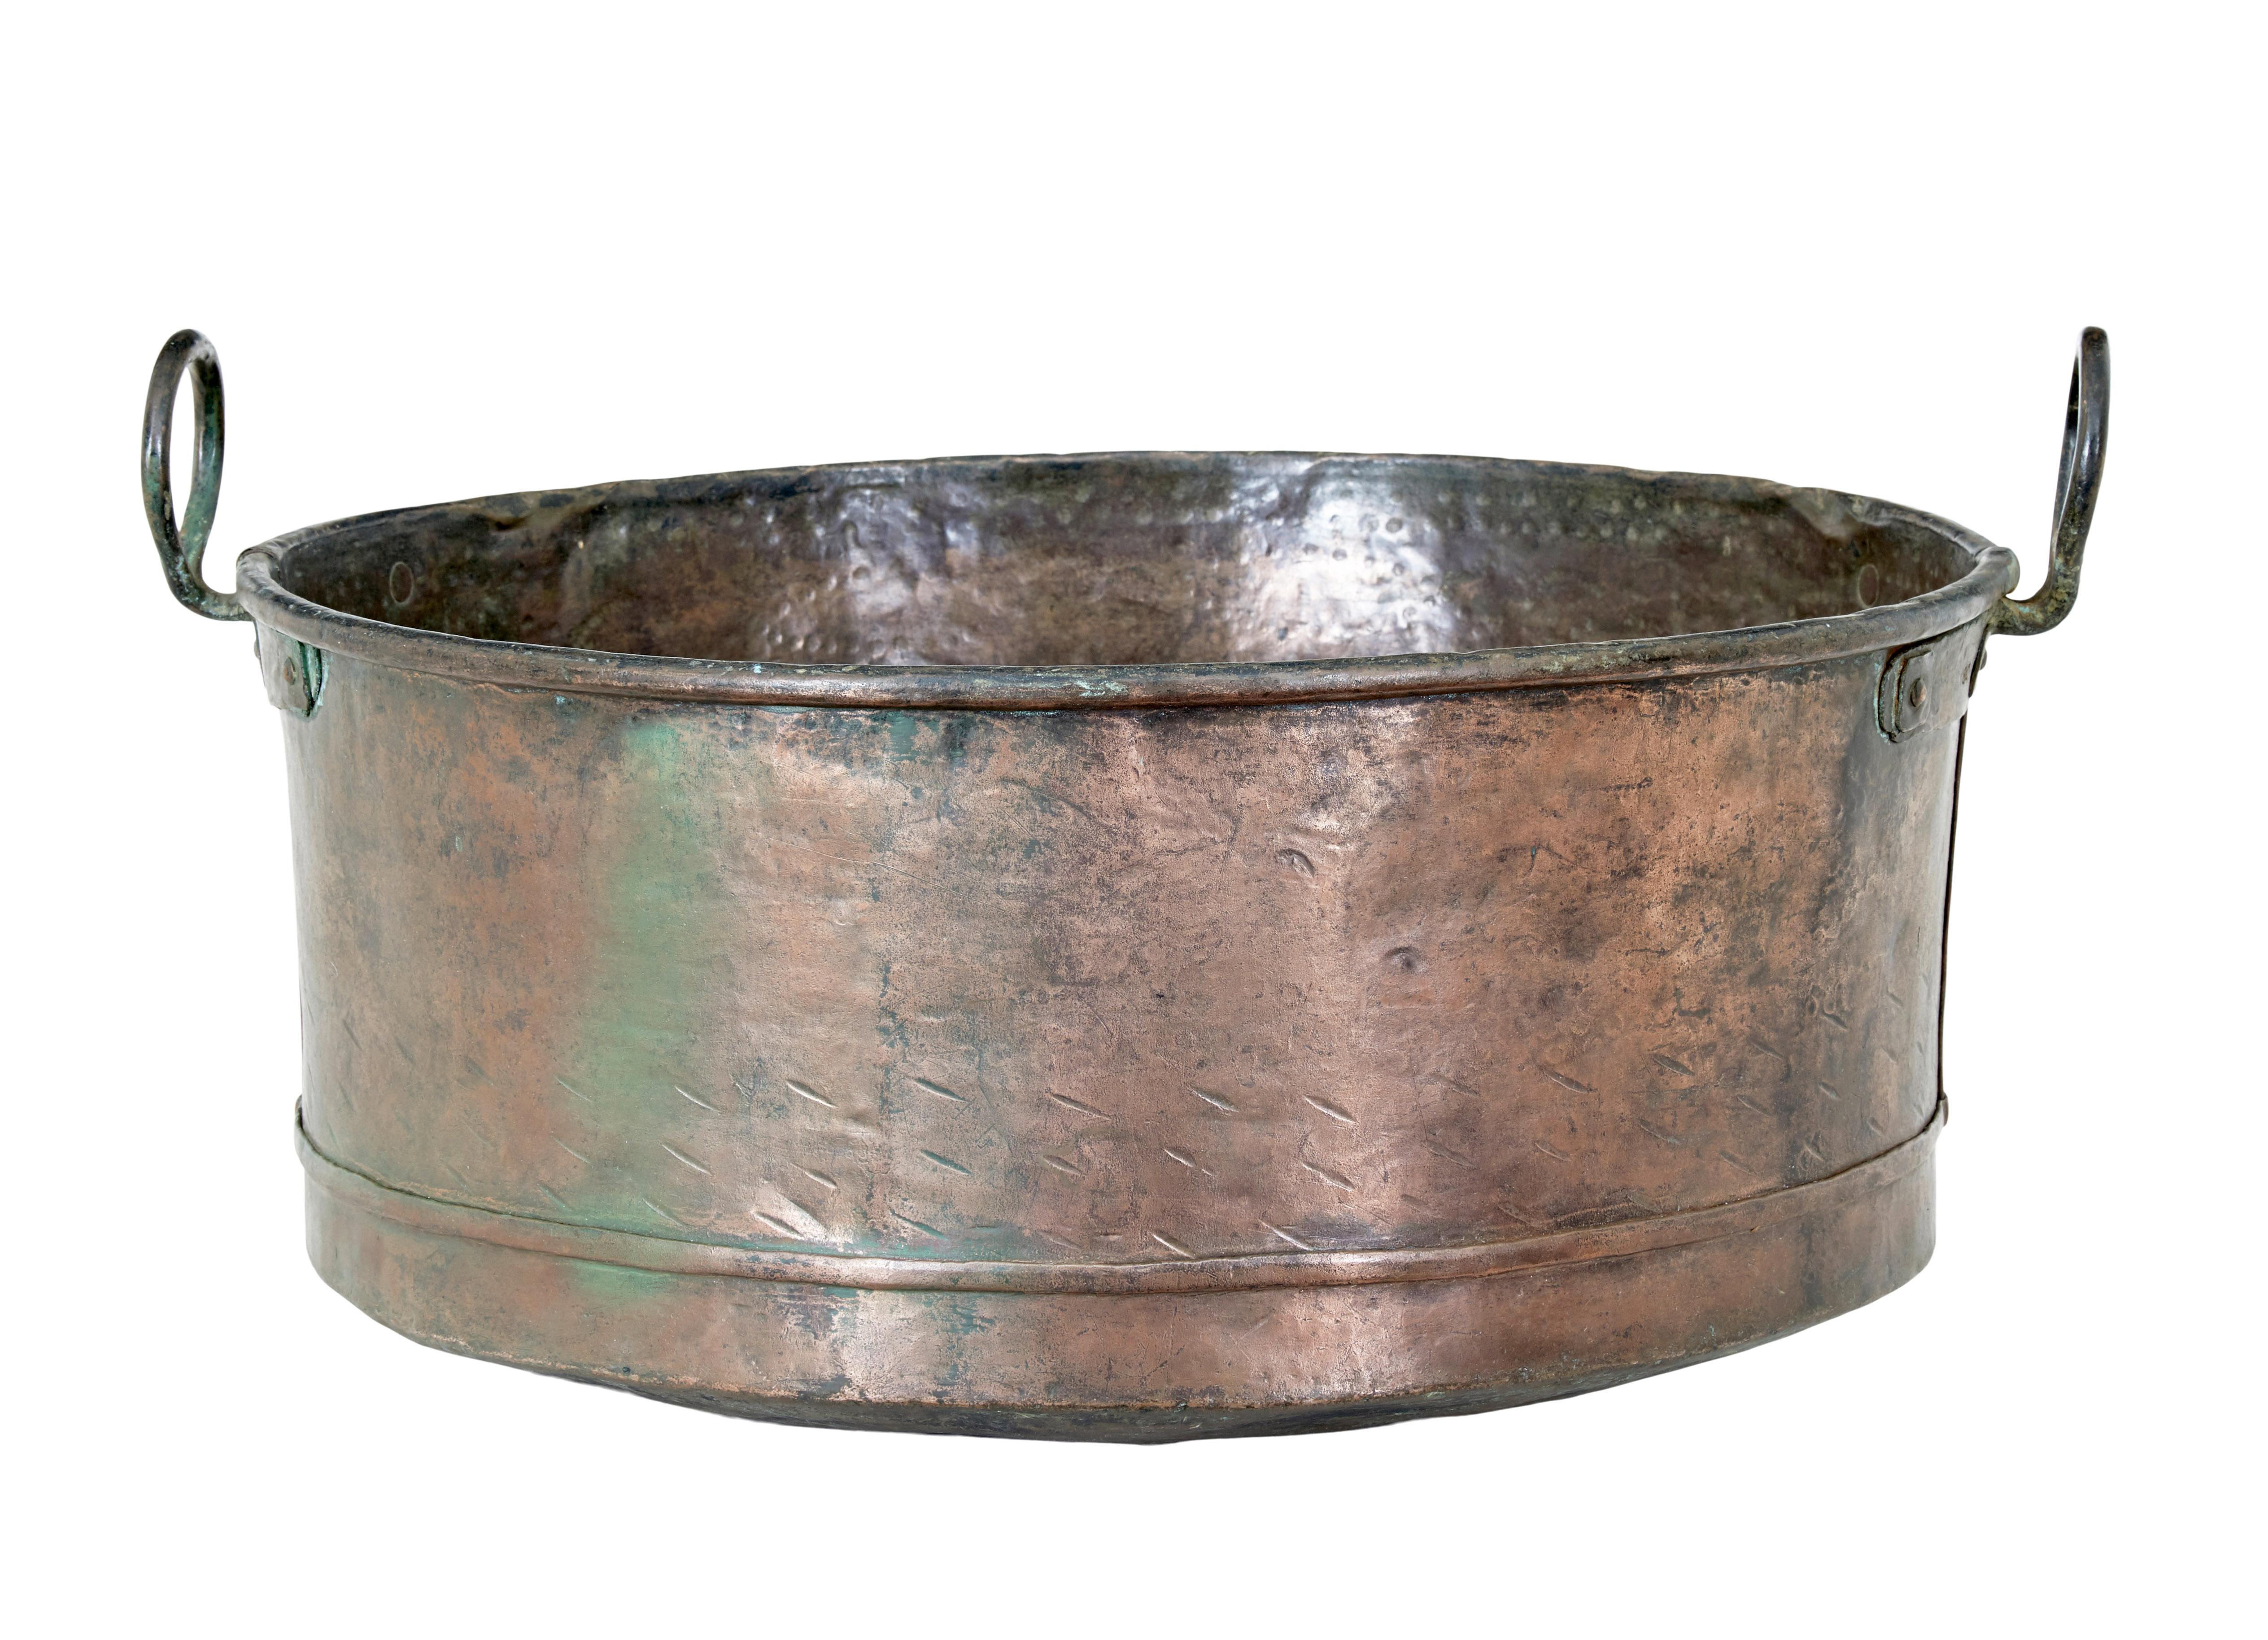 19th century copper cooking vessel circa 1880.

Beautiful quality copper large cooking pot.  A fine example of hand crafted metalwork with its seams, handles and decoration.

Fine piece of decoration or would make an ideal fireside log